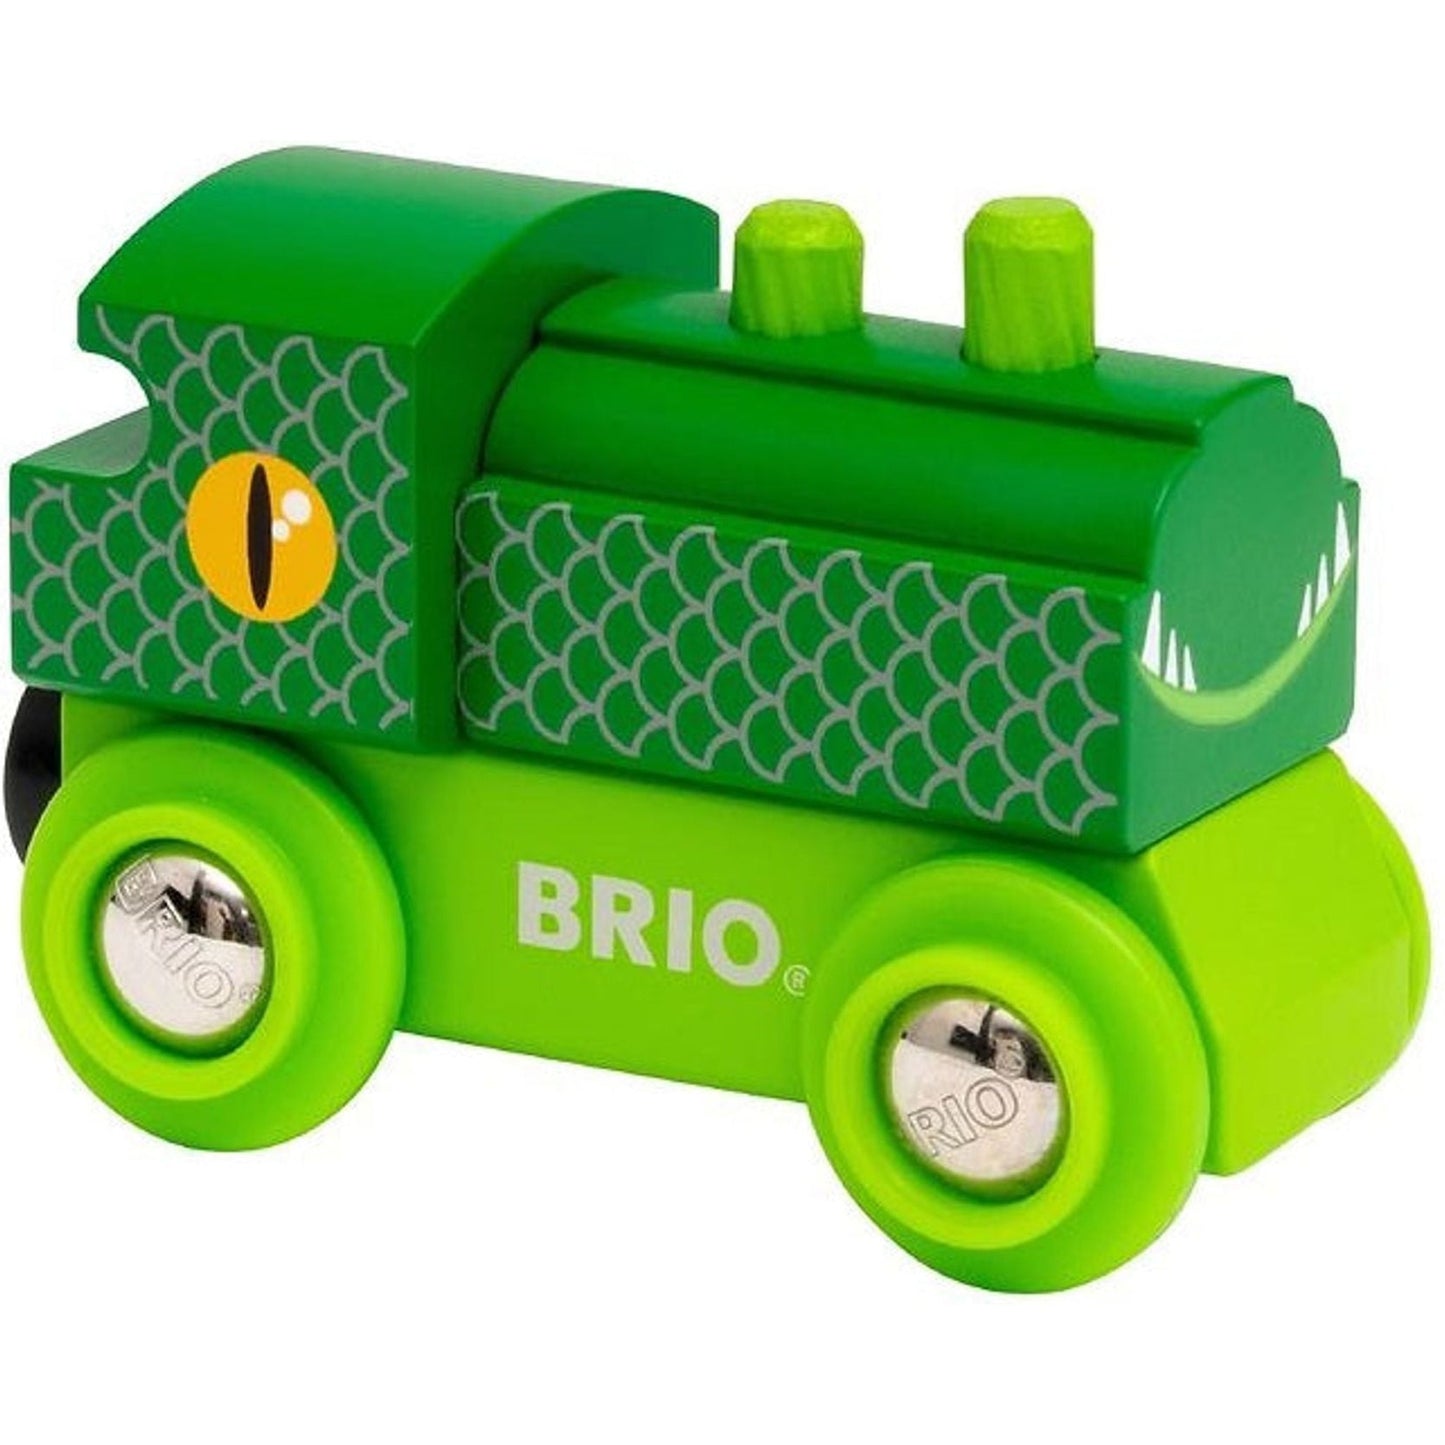 BRIO Train - Themed Trains (Assorted) - Toybox Tales